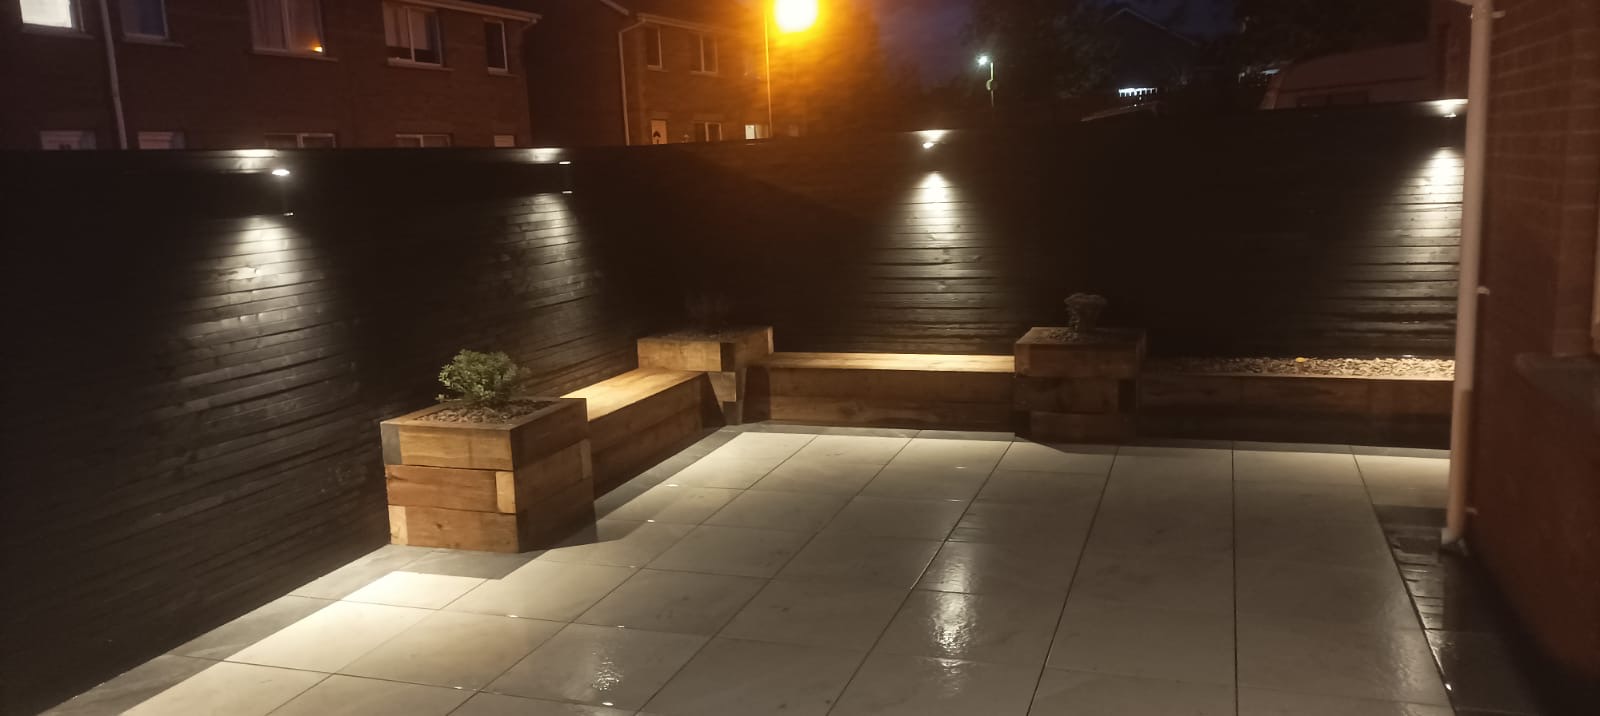 Band of Builders has once again enlisted the help of volunteer builders, landscapers and suppliers, this time to complete a project for 12-year old Aiva Barry at her home in Craigavon, Northern Ireland.